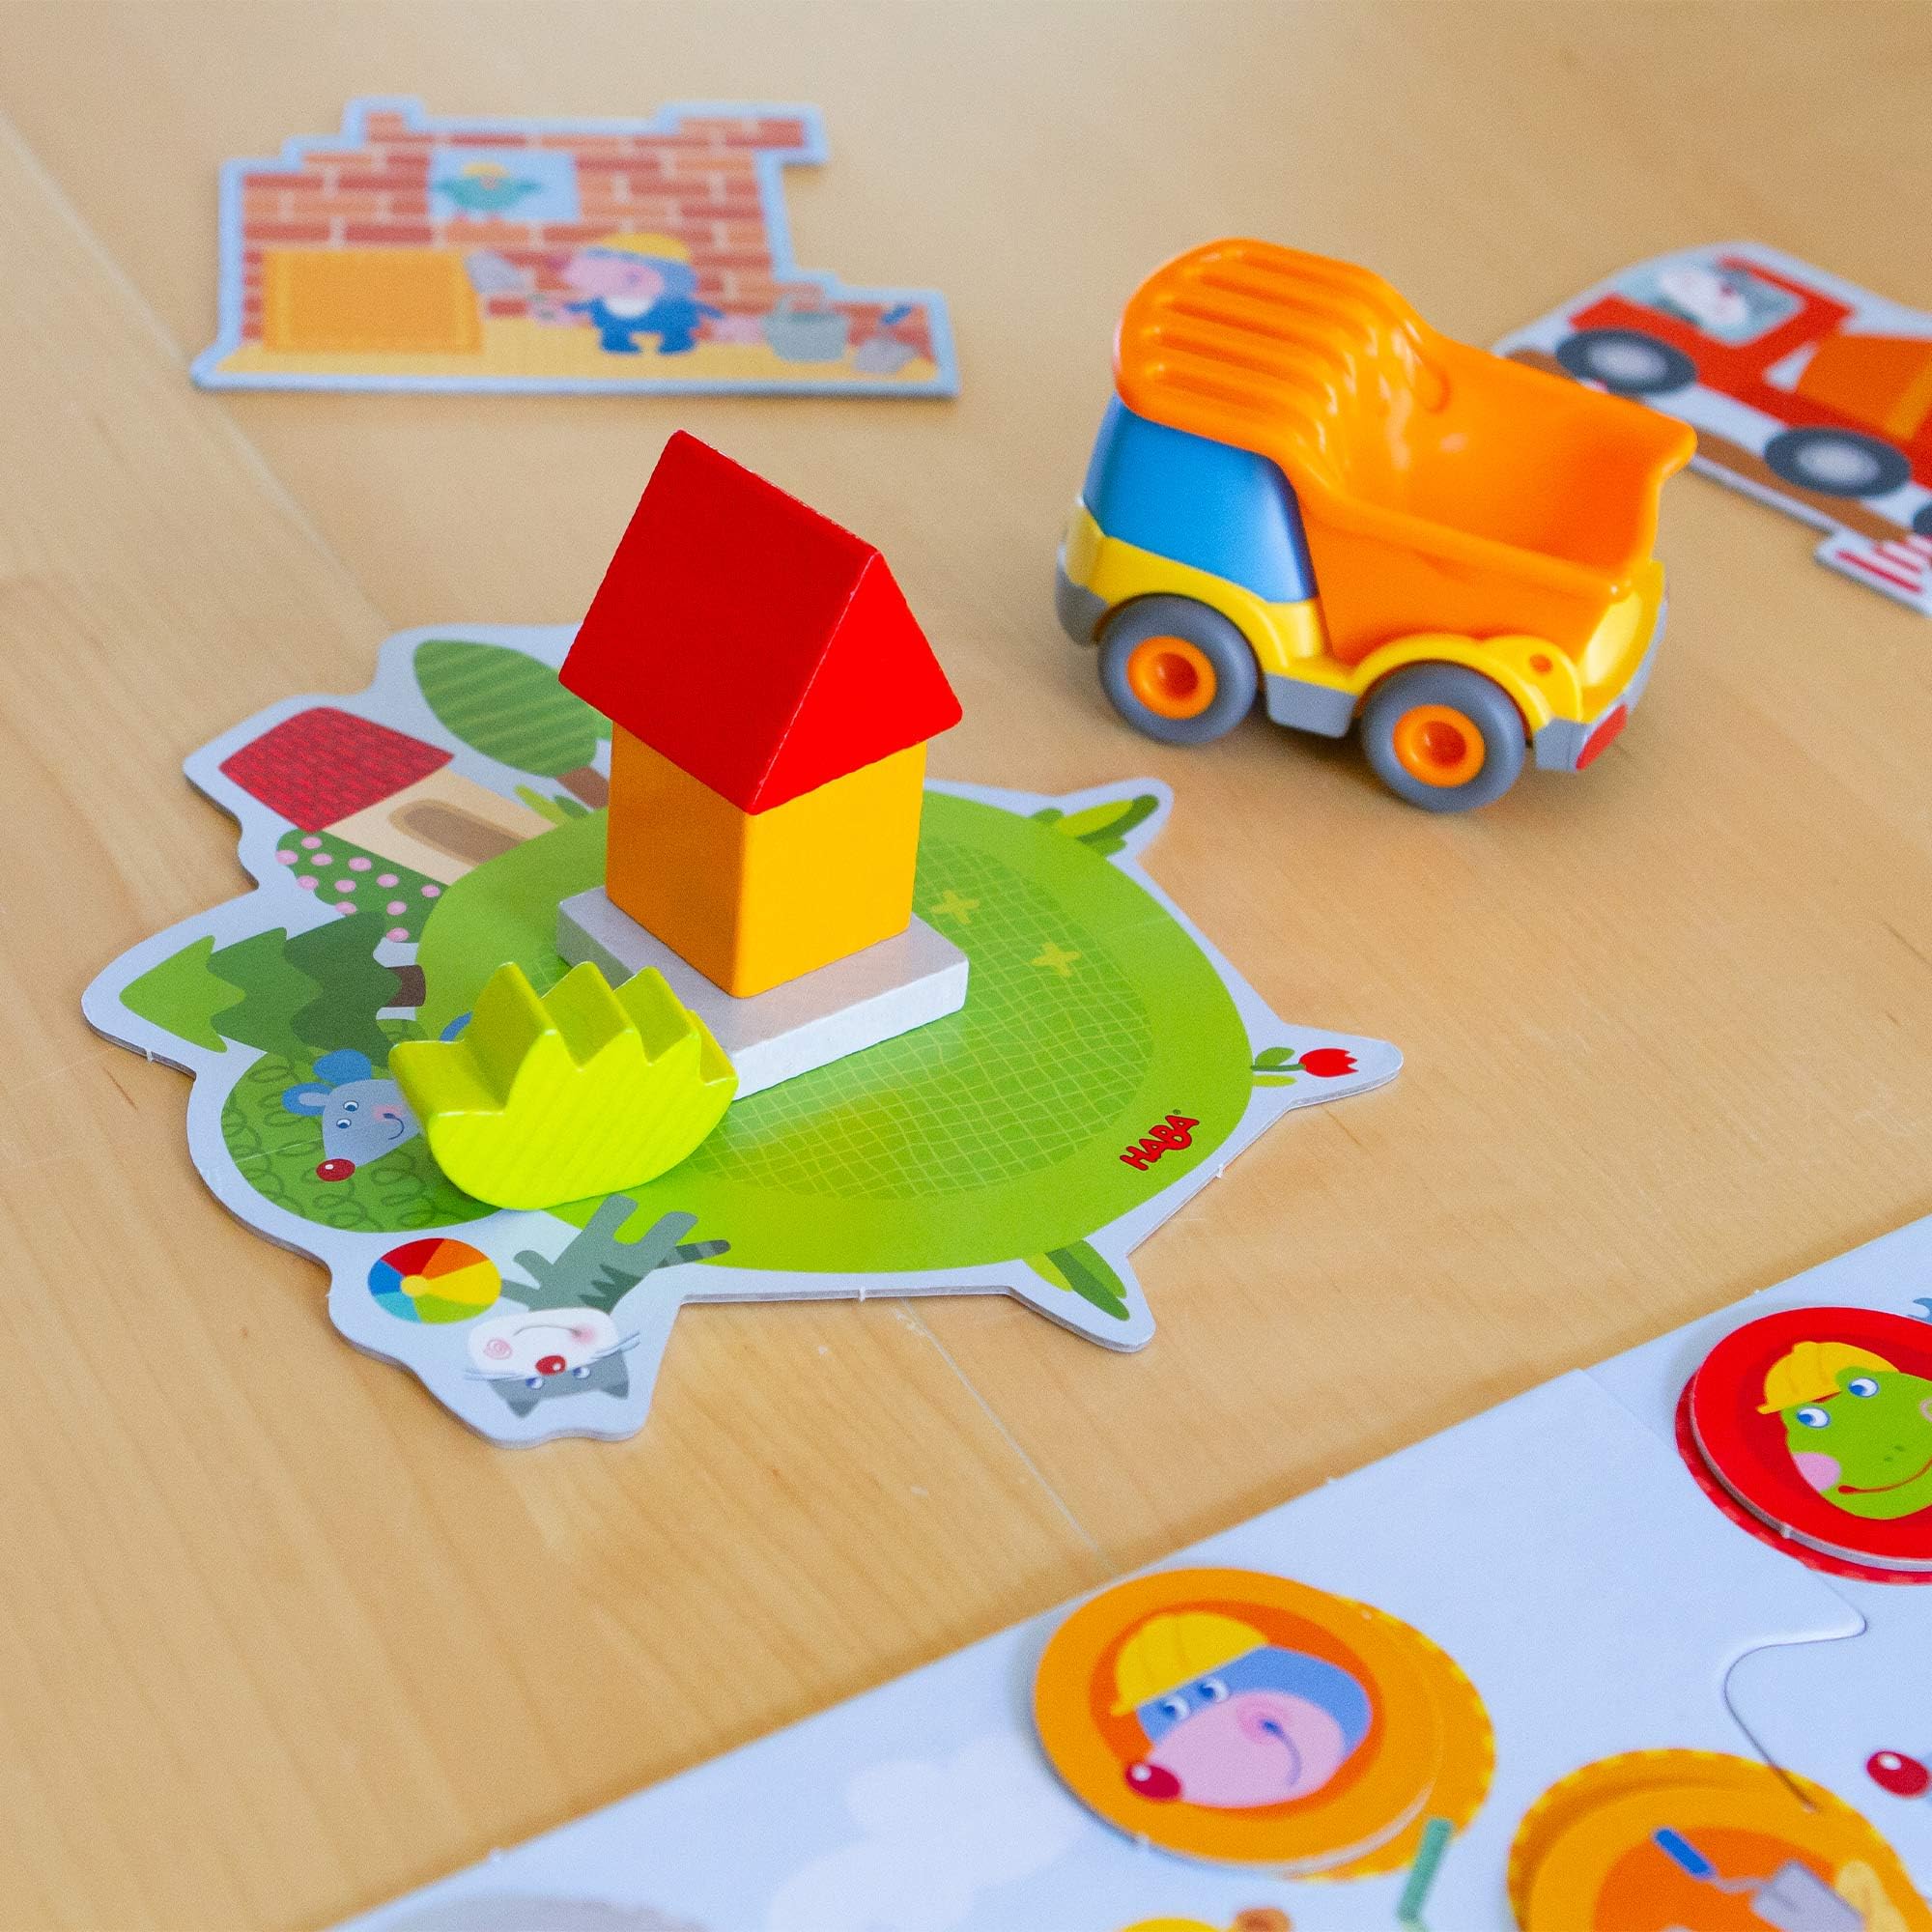 HABA My Very First Games Building Site Cooperative Game for Ages 2+